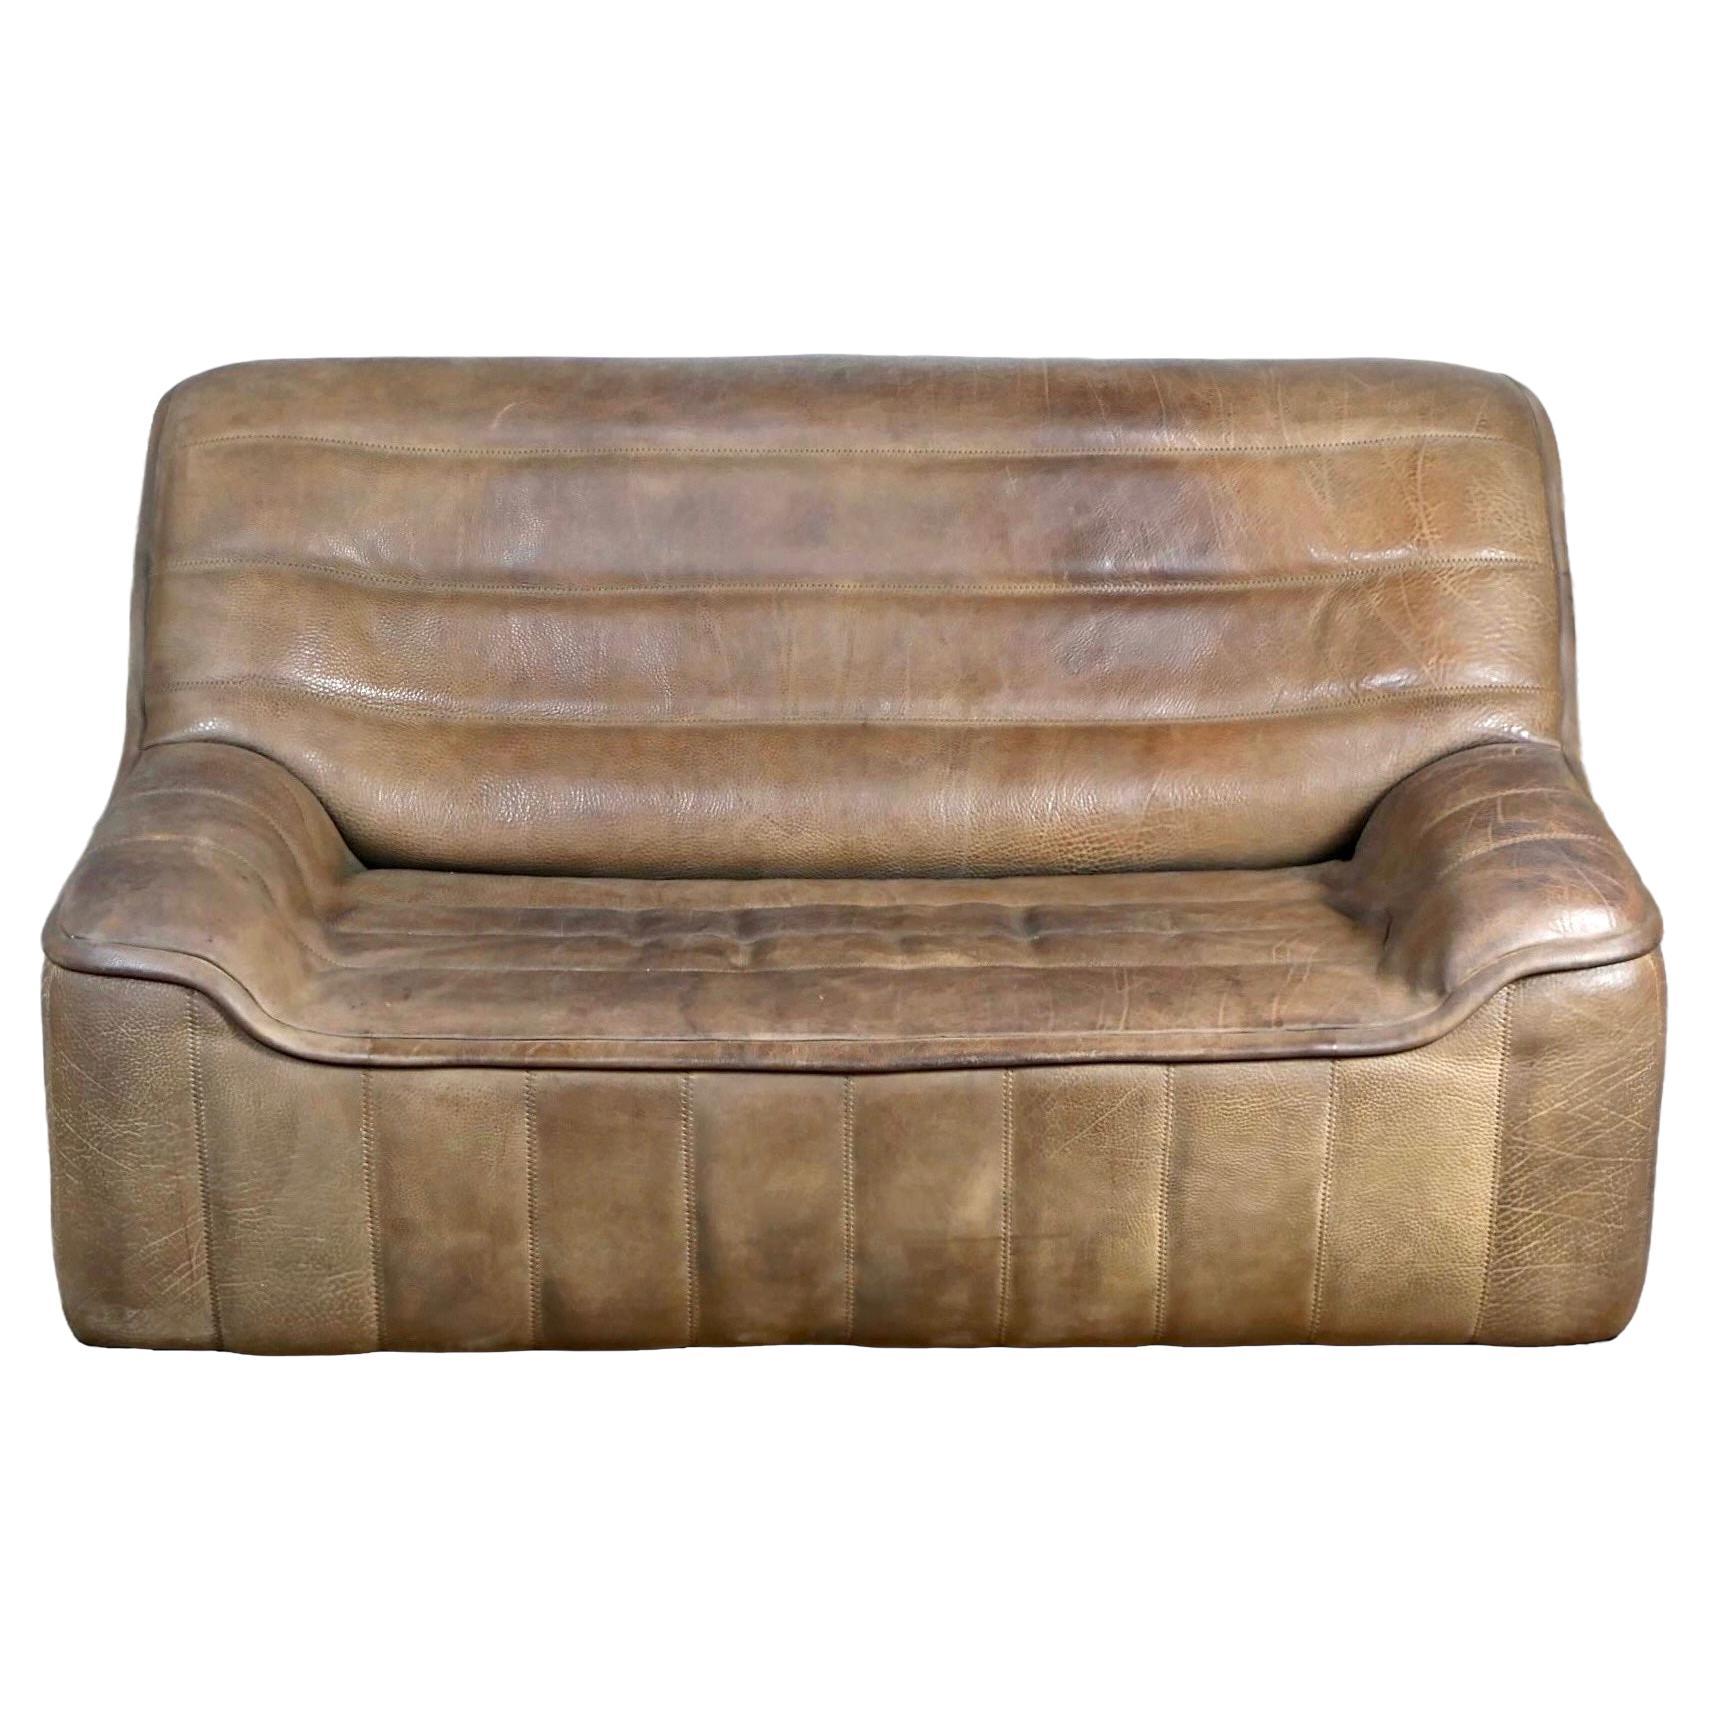 De Sede DS-84 sofa in taupe buffalo leather, 1970s, from Switzerland